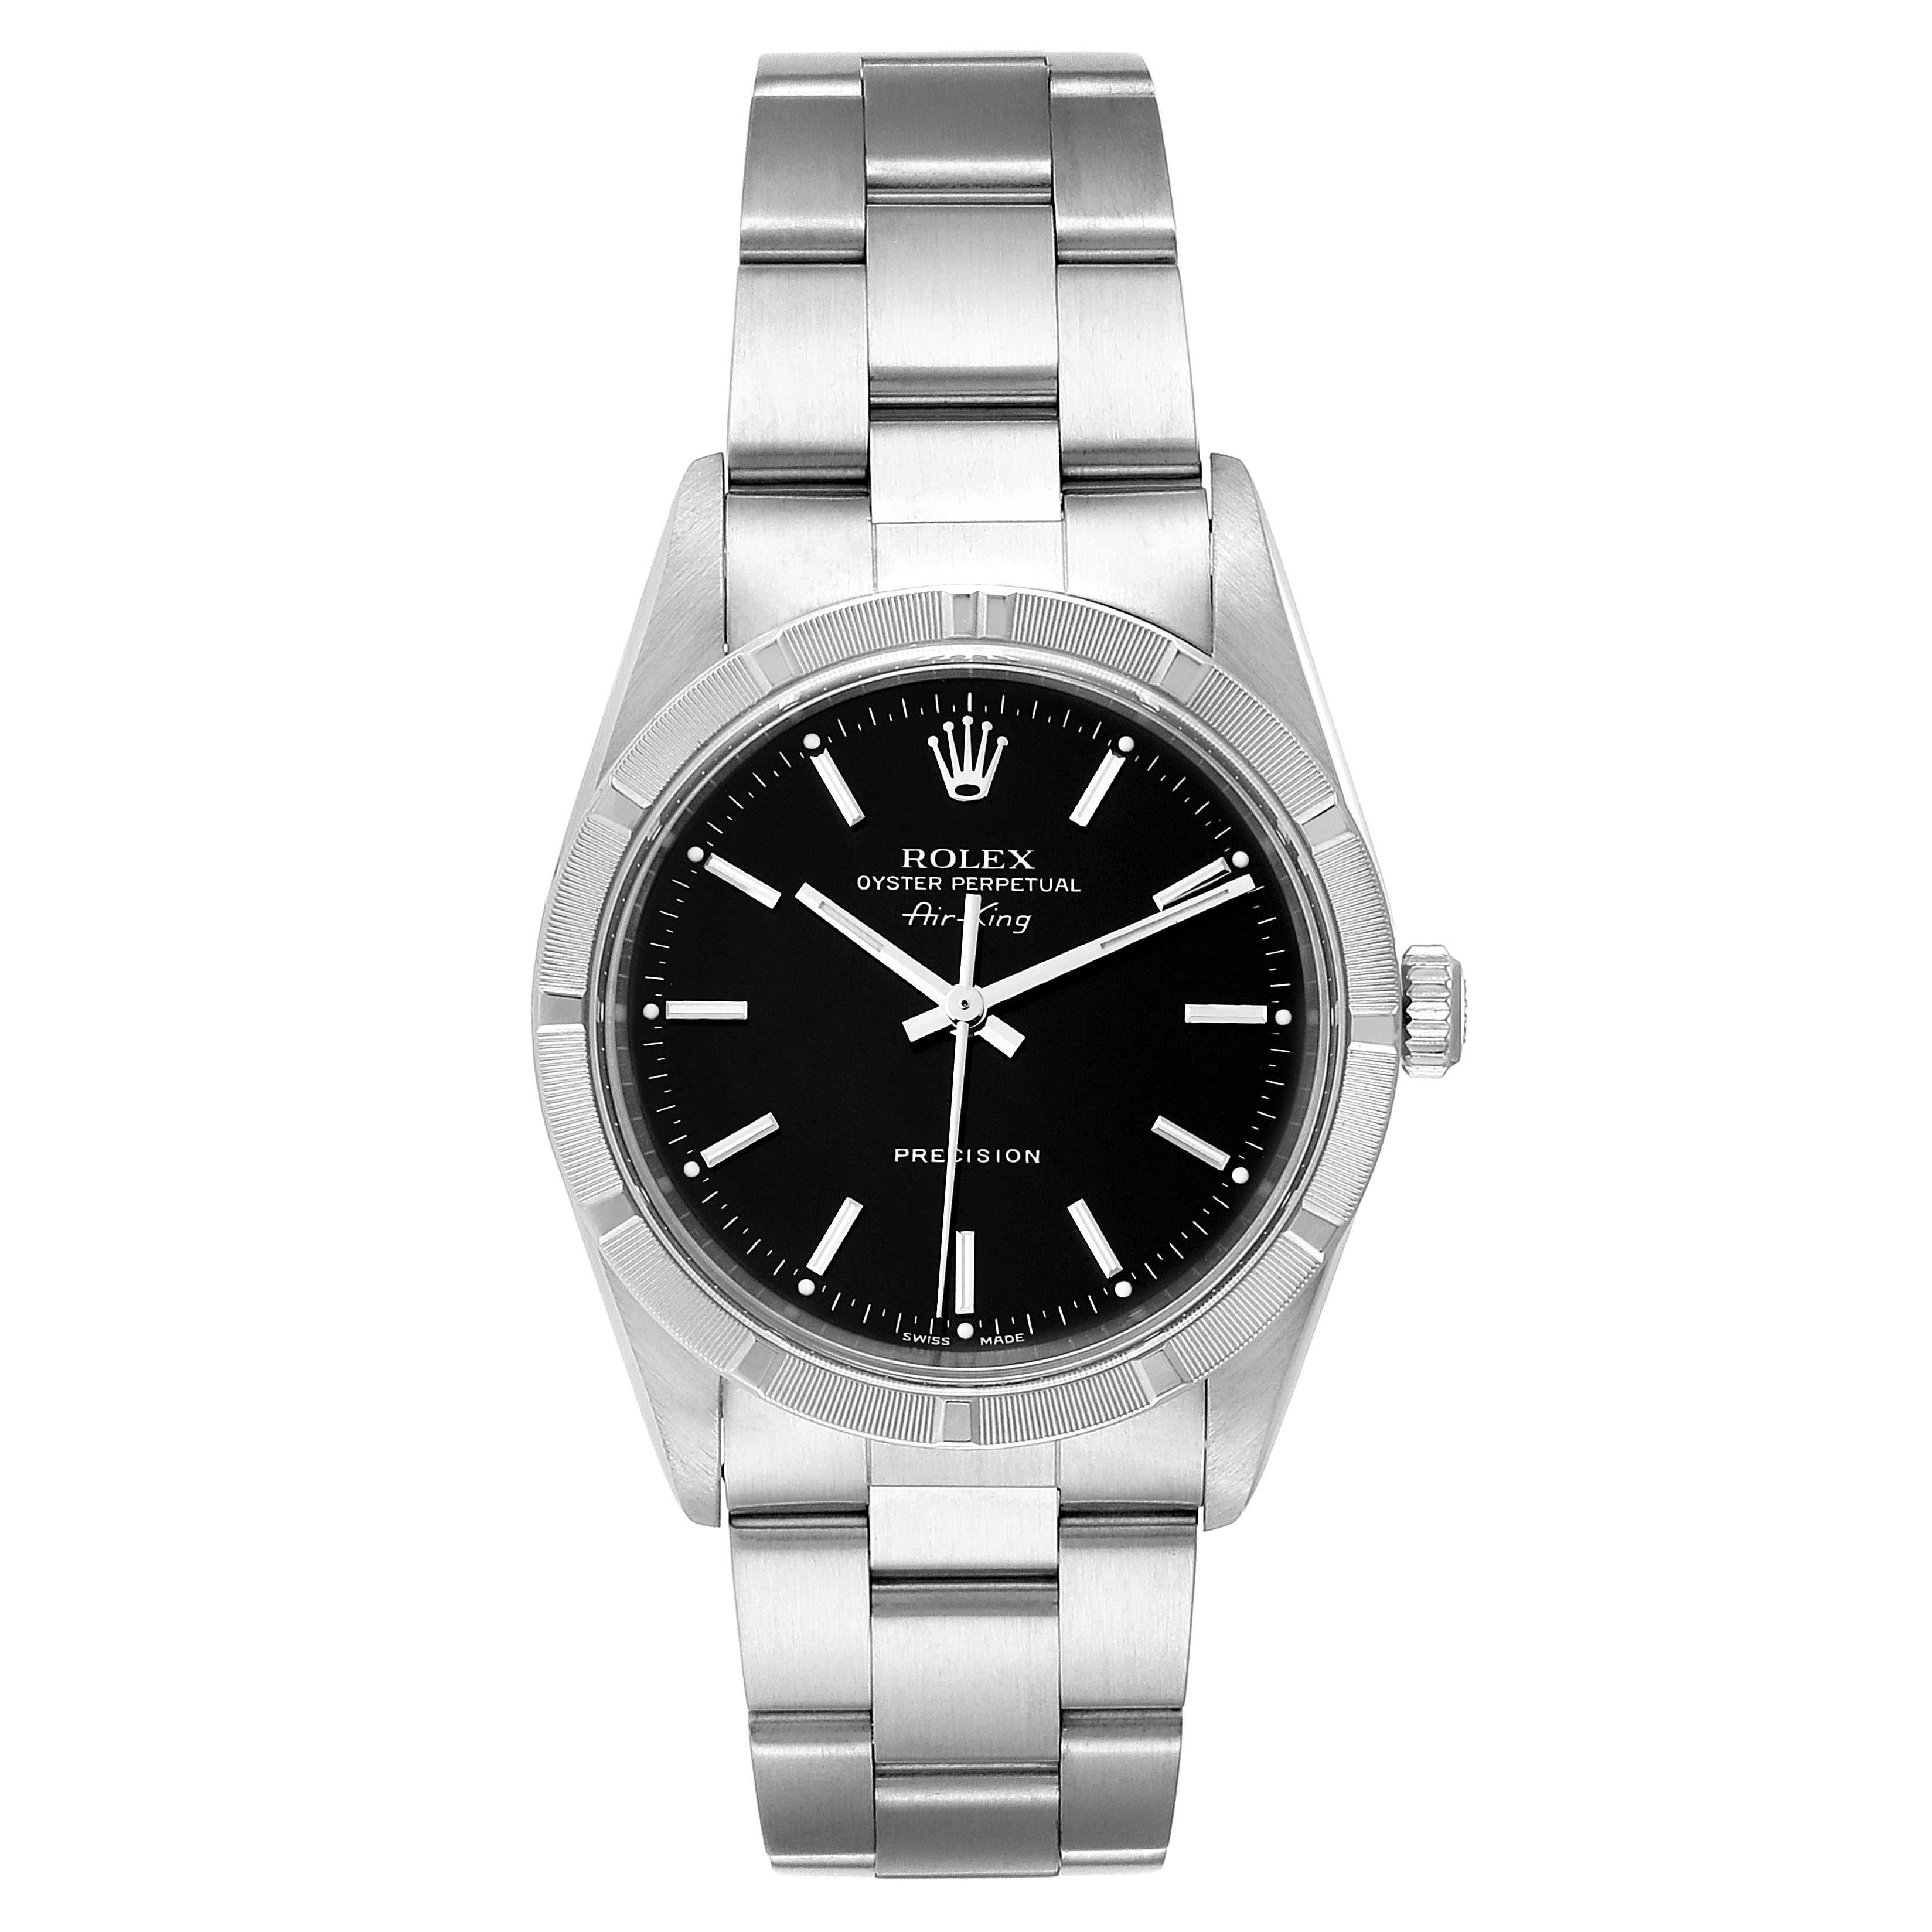 Rolex Air King 34 Black Dial Oyster Bracelet Steeel Mens Watch 14010. Automatic self-winding movement. Stainless steel case 34.0 mm in diameter. Rolex logo on a crown. Stainless steel engine turned bezel. Scratch resistant sapphire crystal. Black